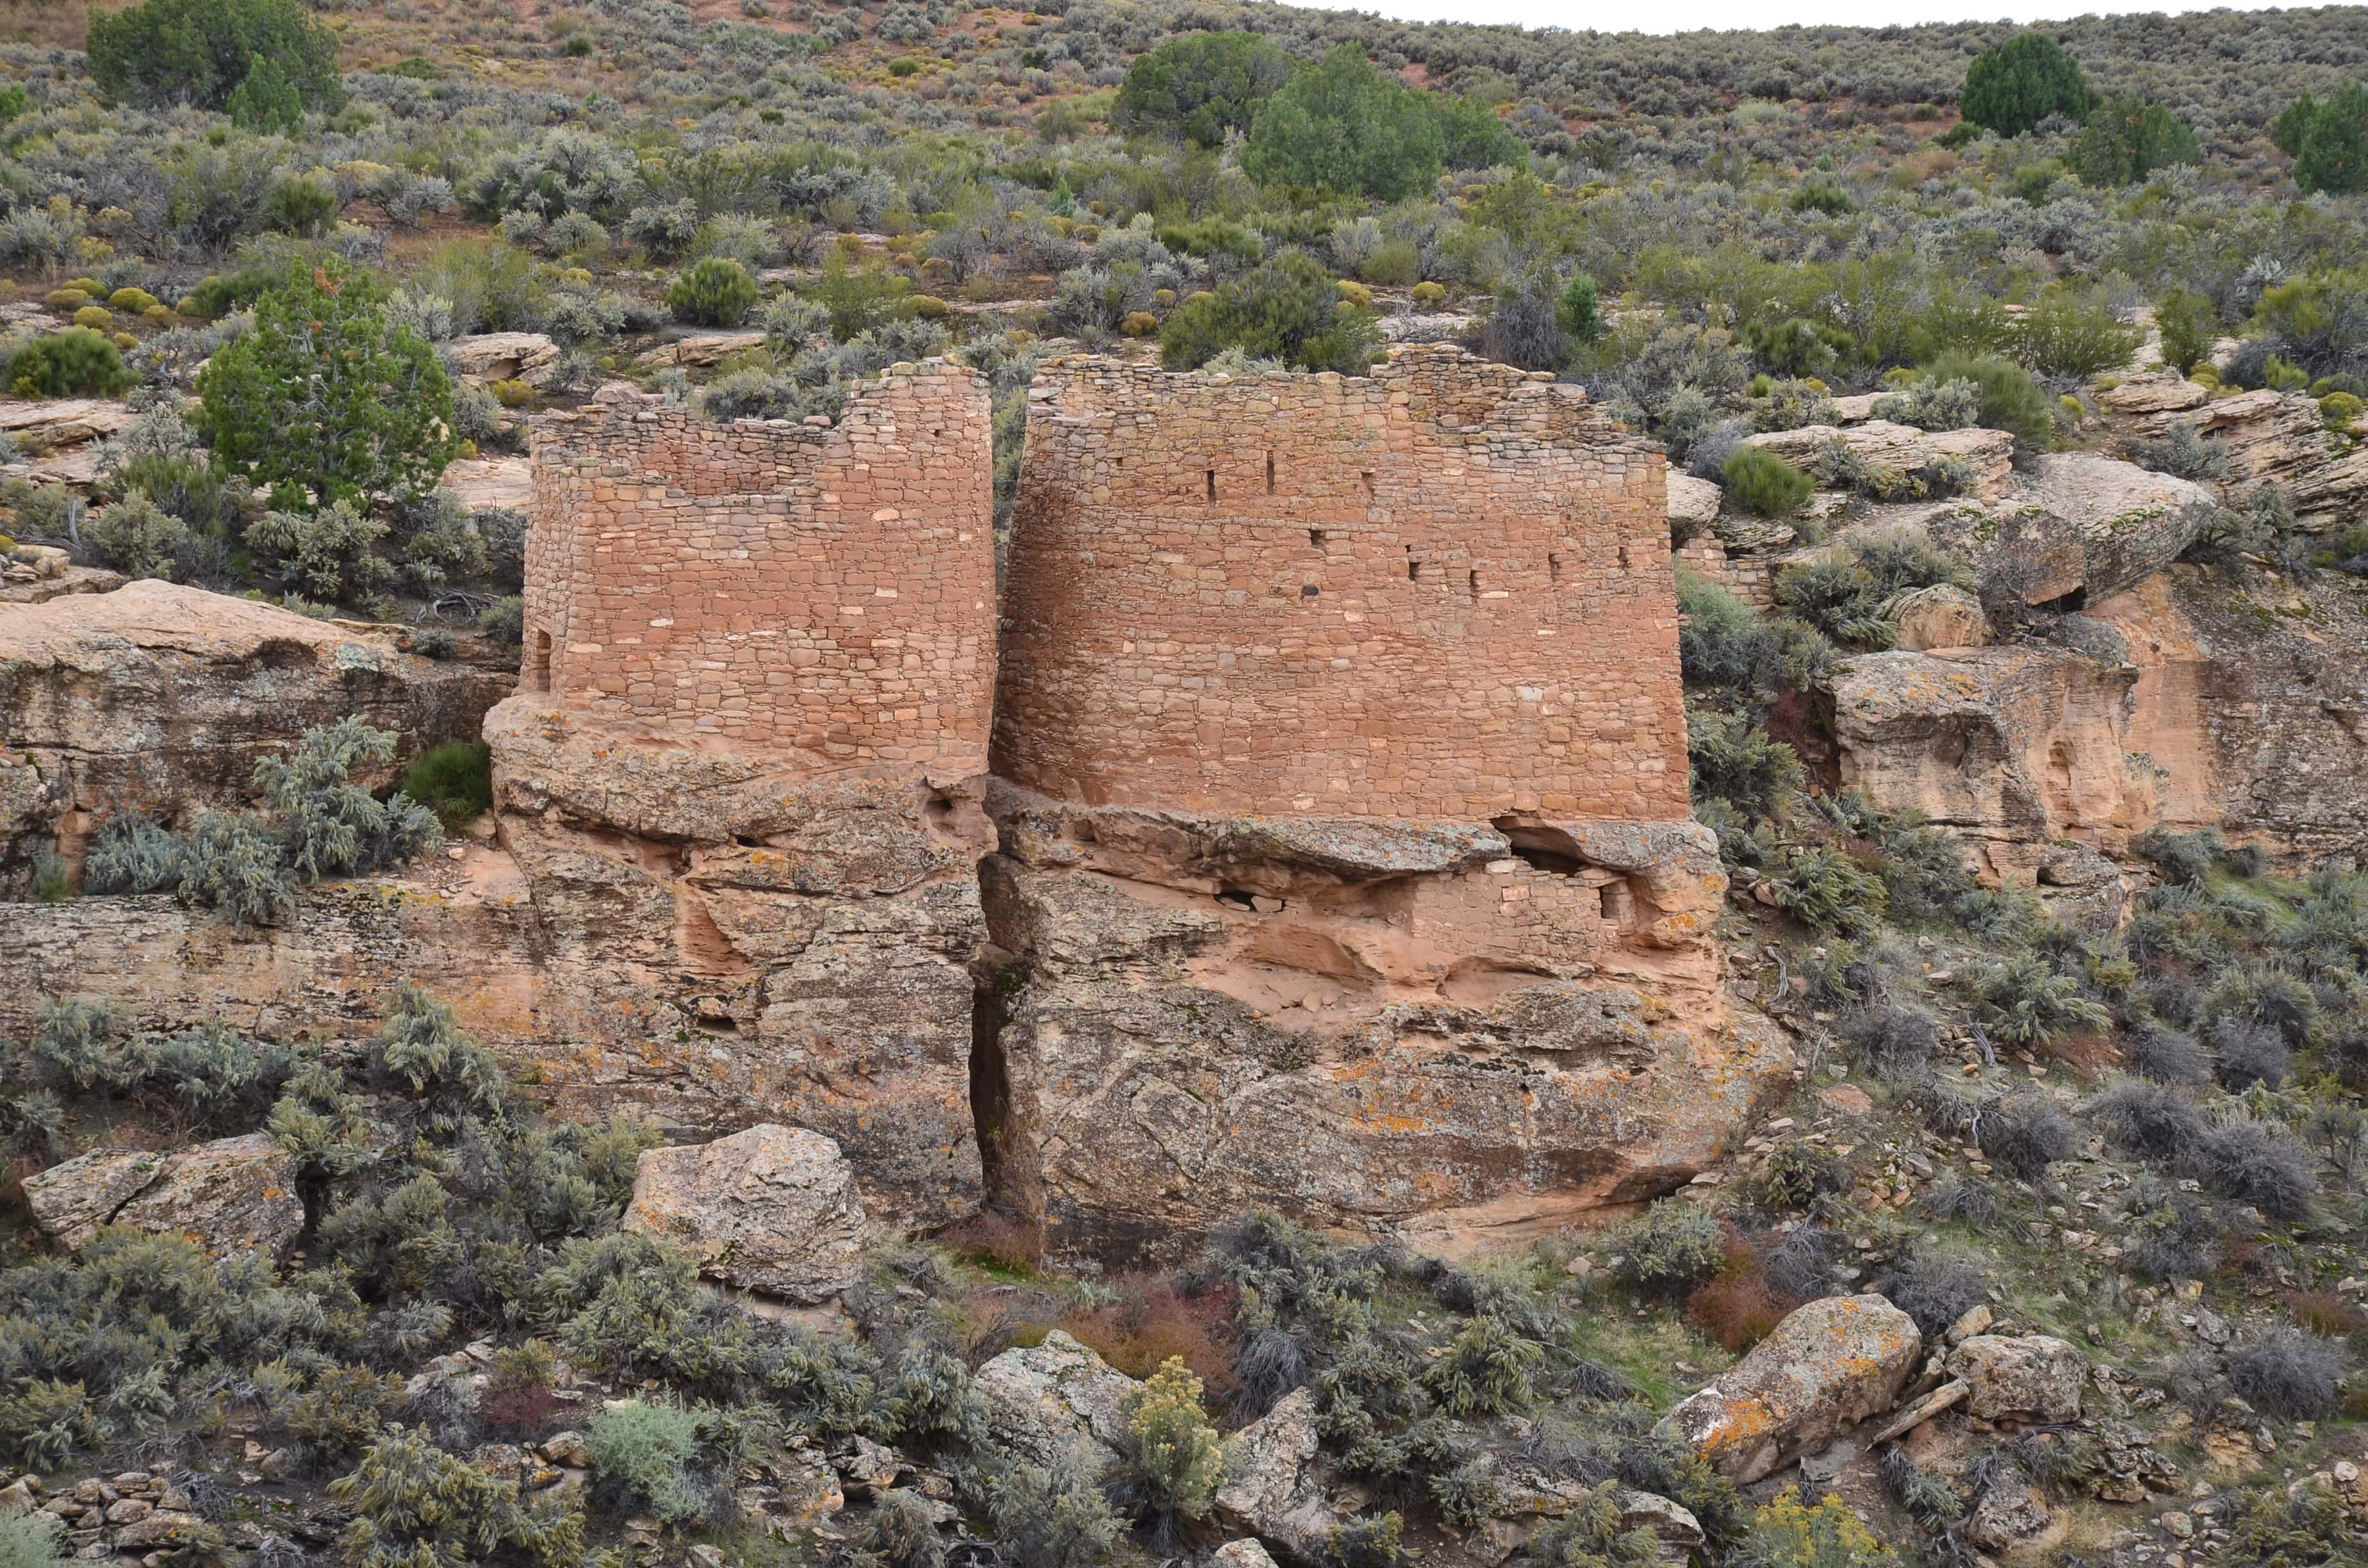 Twin Towers at Hovenweep National Monument in Utah